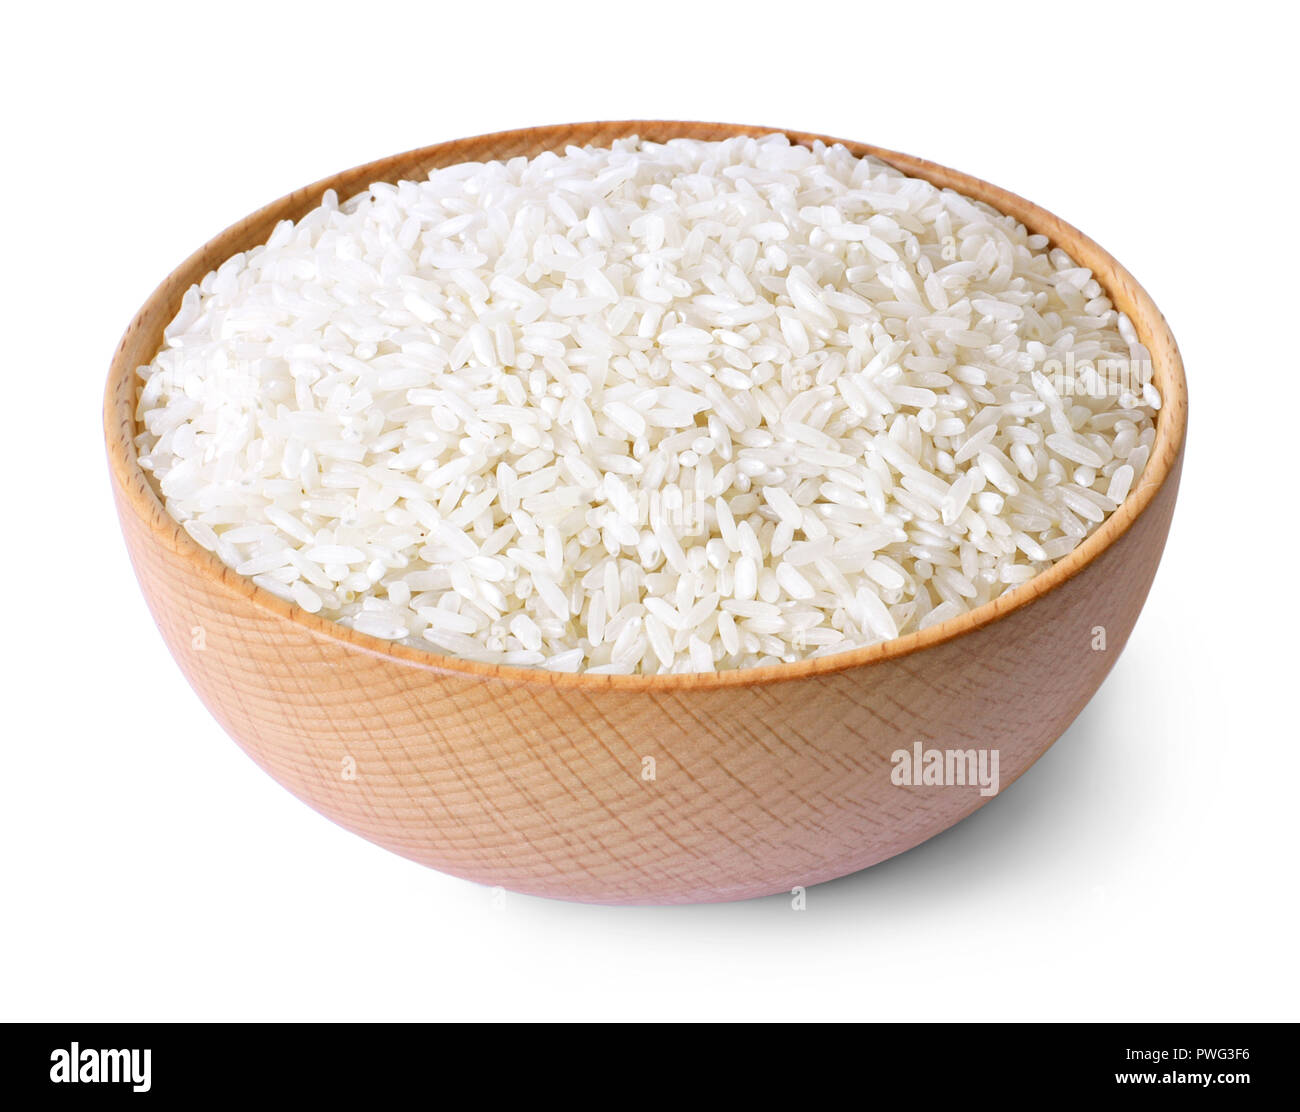 Raw, parboiled rice in a wooden bowl. Rice dish, isolated on white background, diet or healthy eating scene. Stock Photo